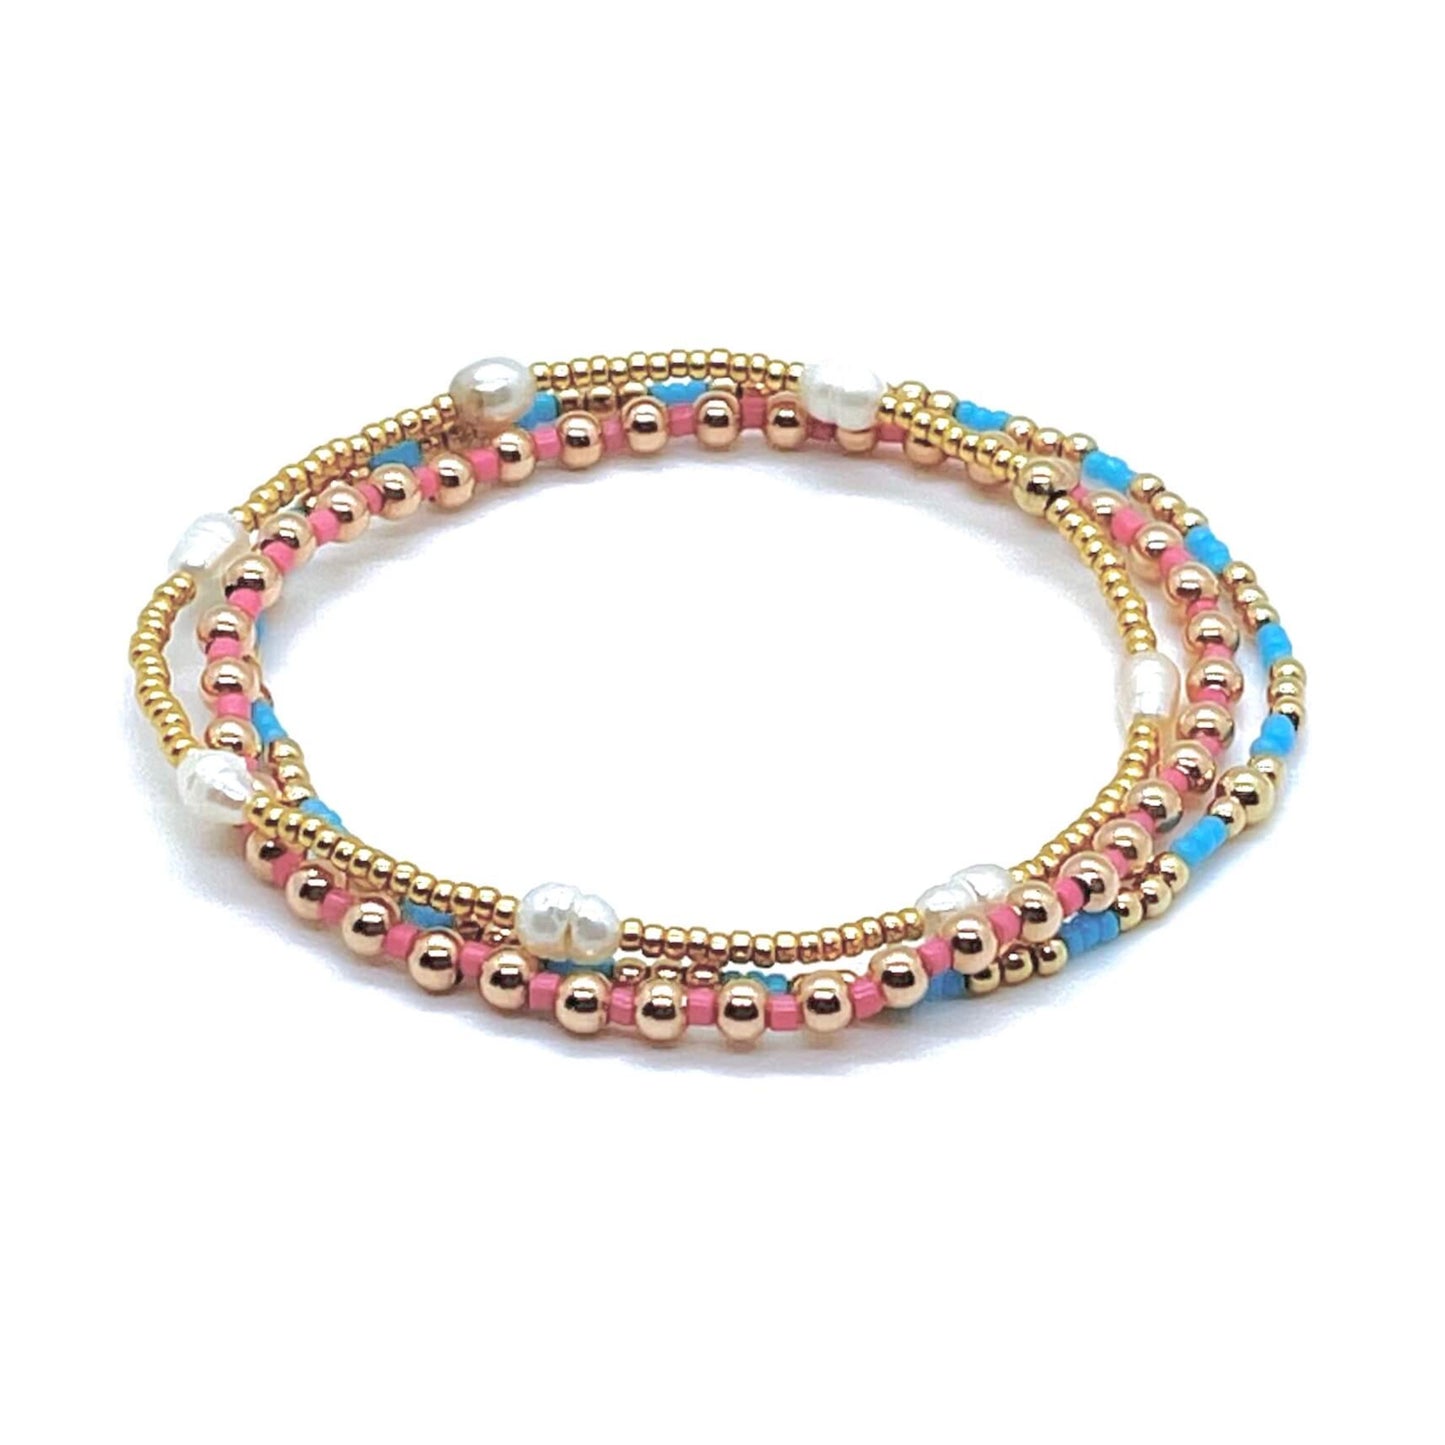 Stack of 3 dainty gold ball, freshwater pearl, and pink and light blue seed bead stretch bracelets for women.